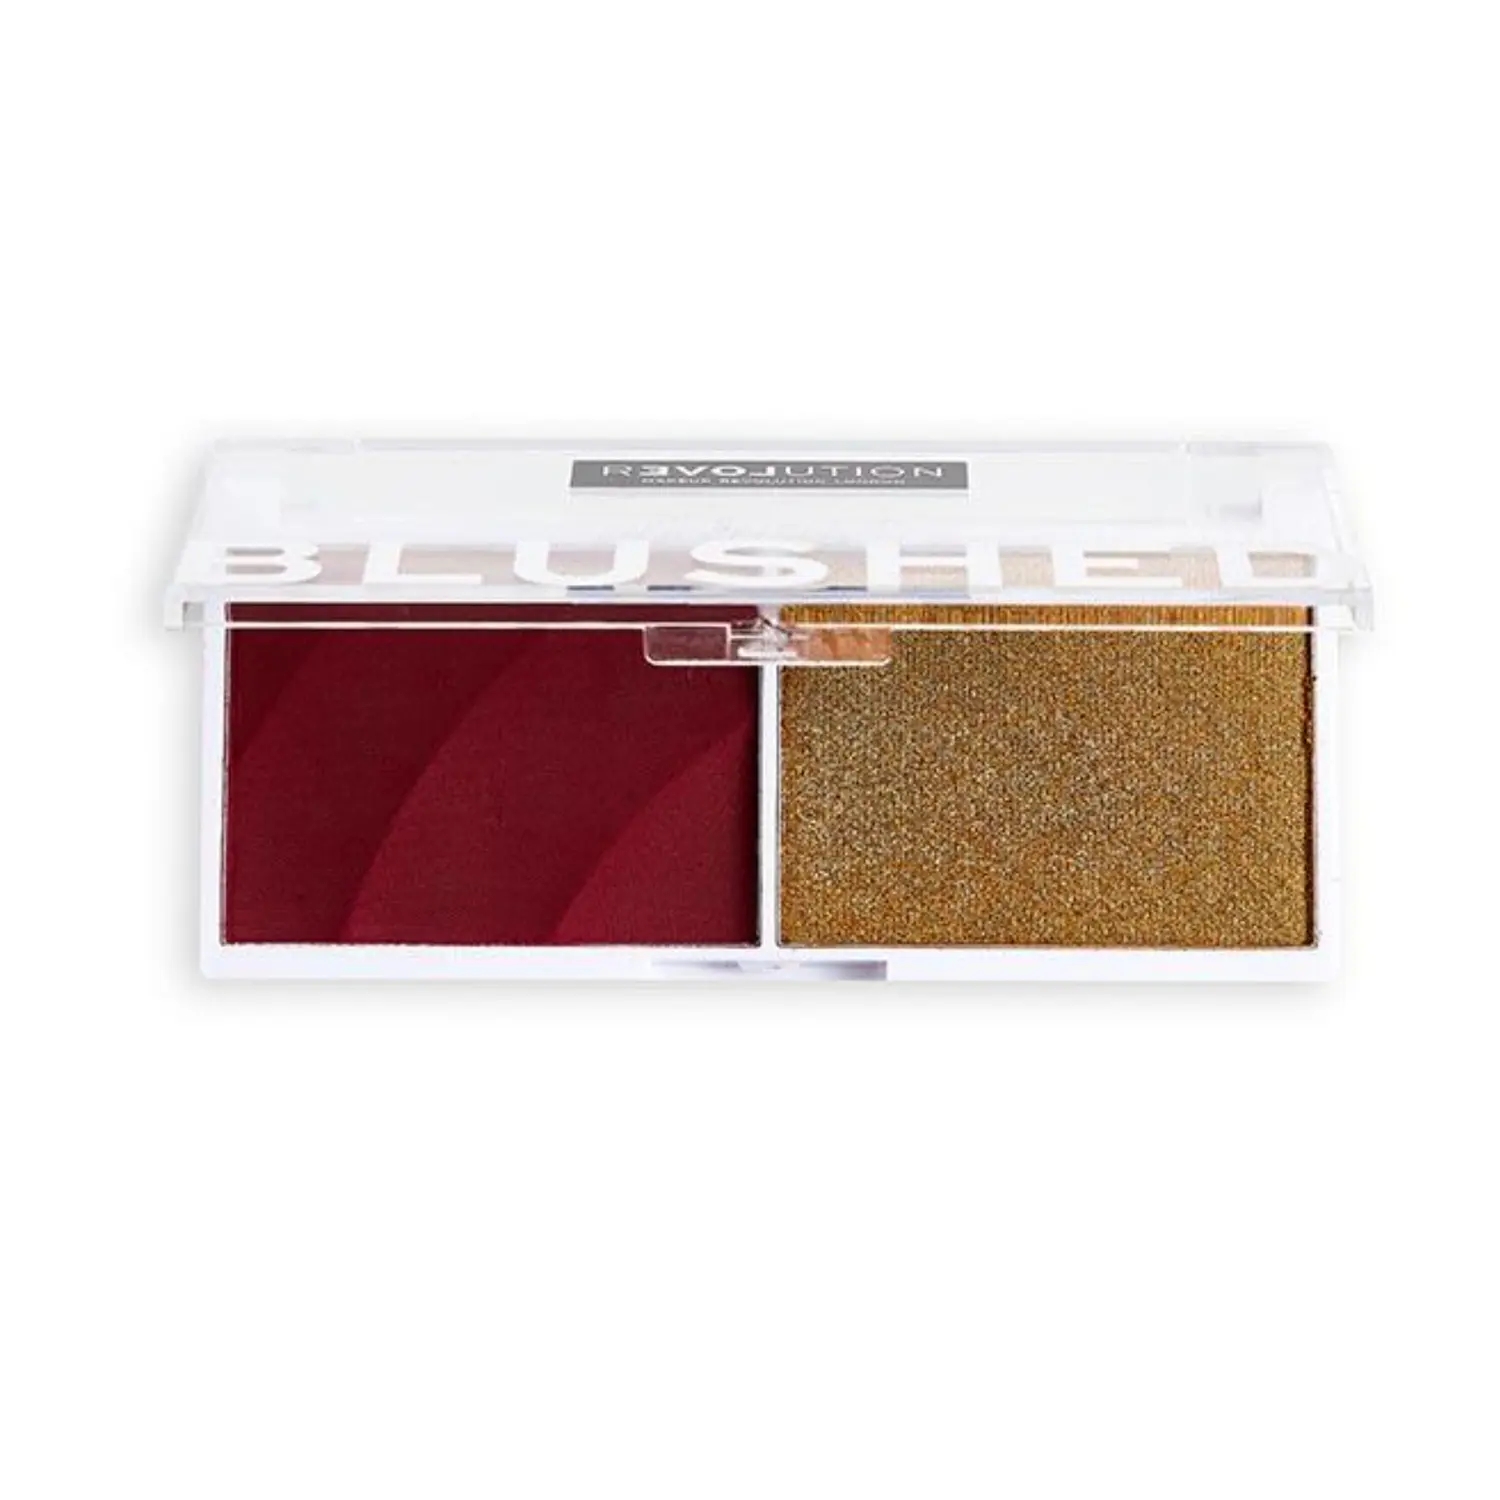 Makeup Revolution Remove Colour Play Blushed Duo Face Palette - Wishful ( 5.8g)